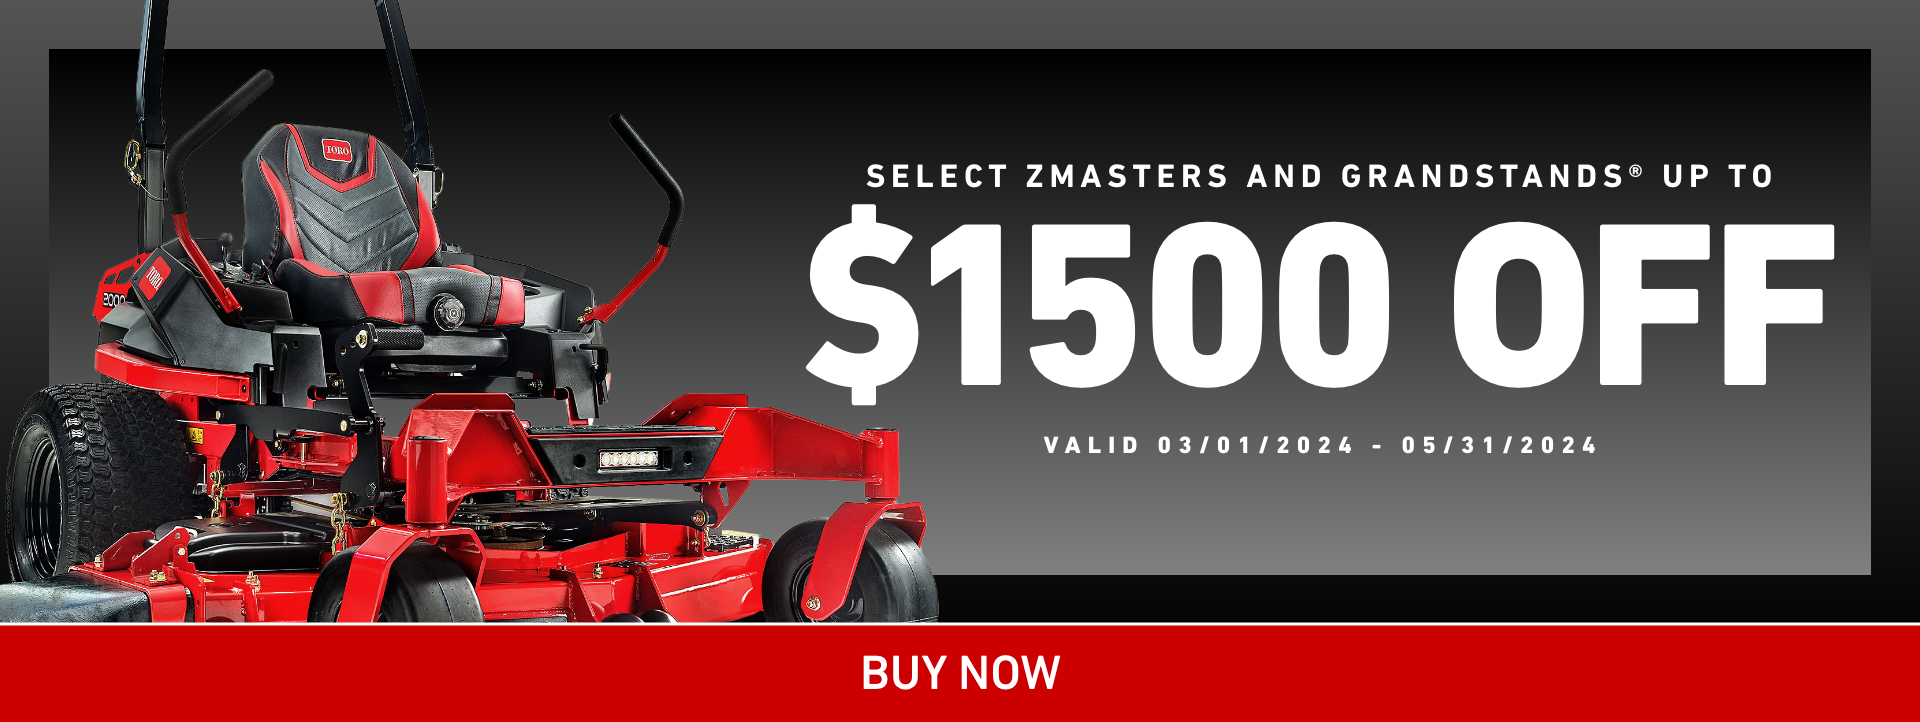 $1,500 off select Z Masters and GrandStand Mowers valid March 1, 2024 to May 31, 2024